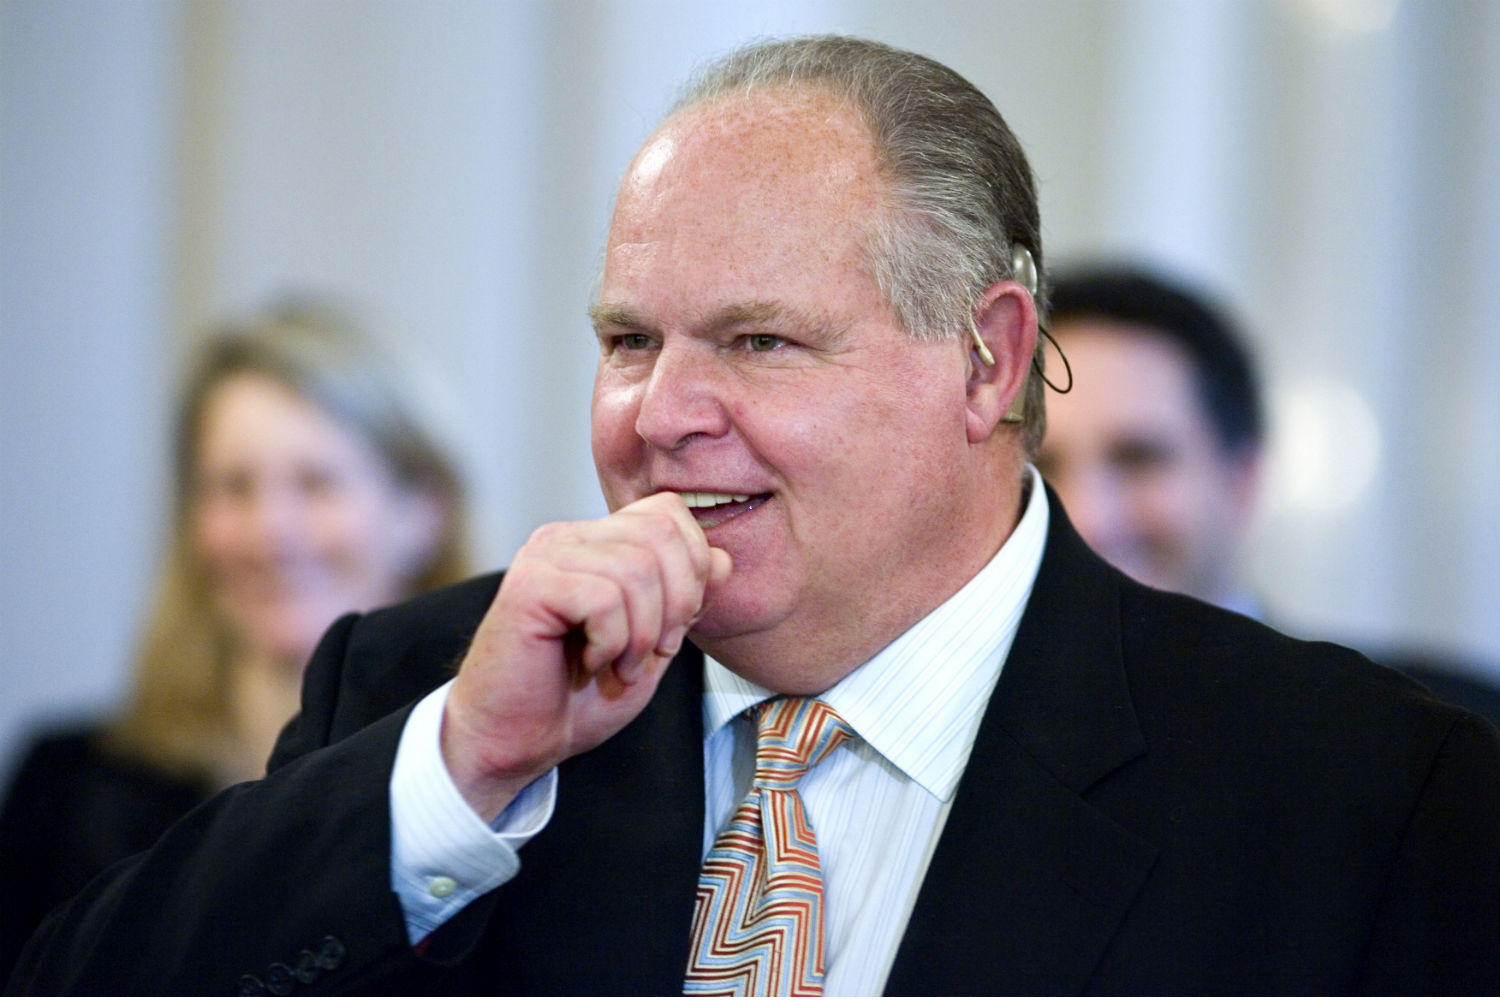 Guess Which Women’s Group Rush Limbaugh Has Donated Hundreds of Thousands of Dollars to?